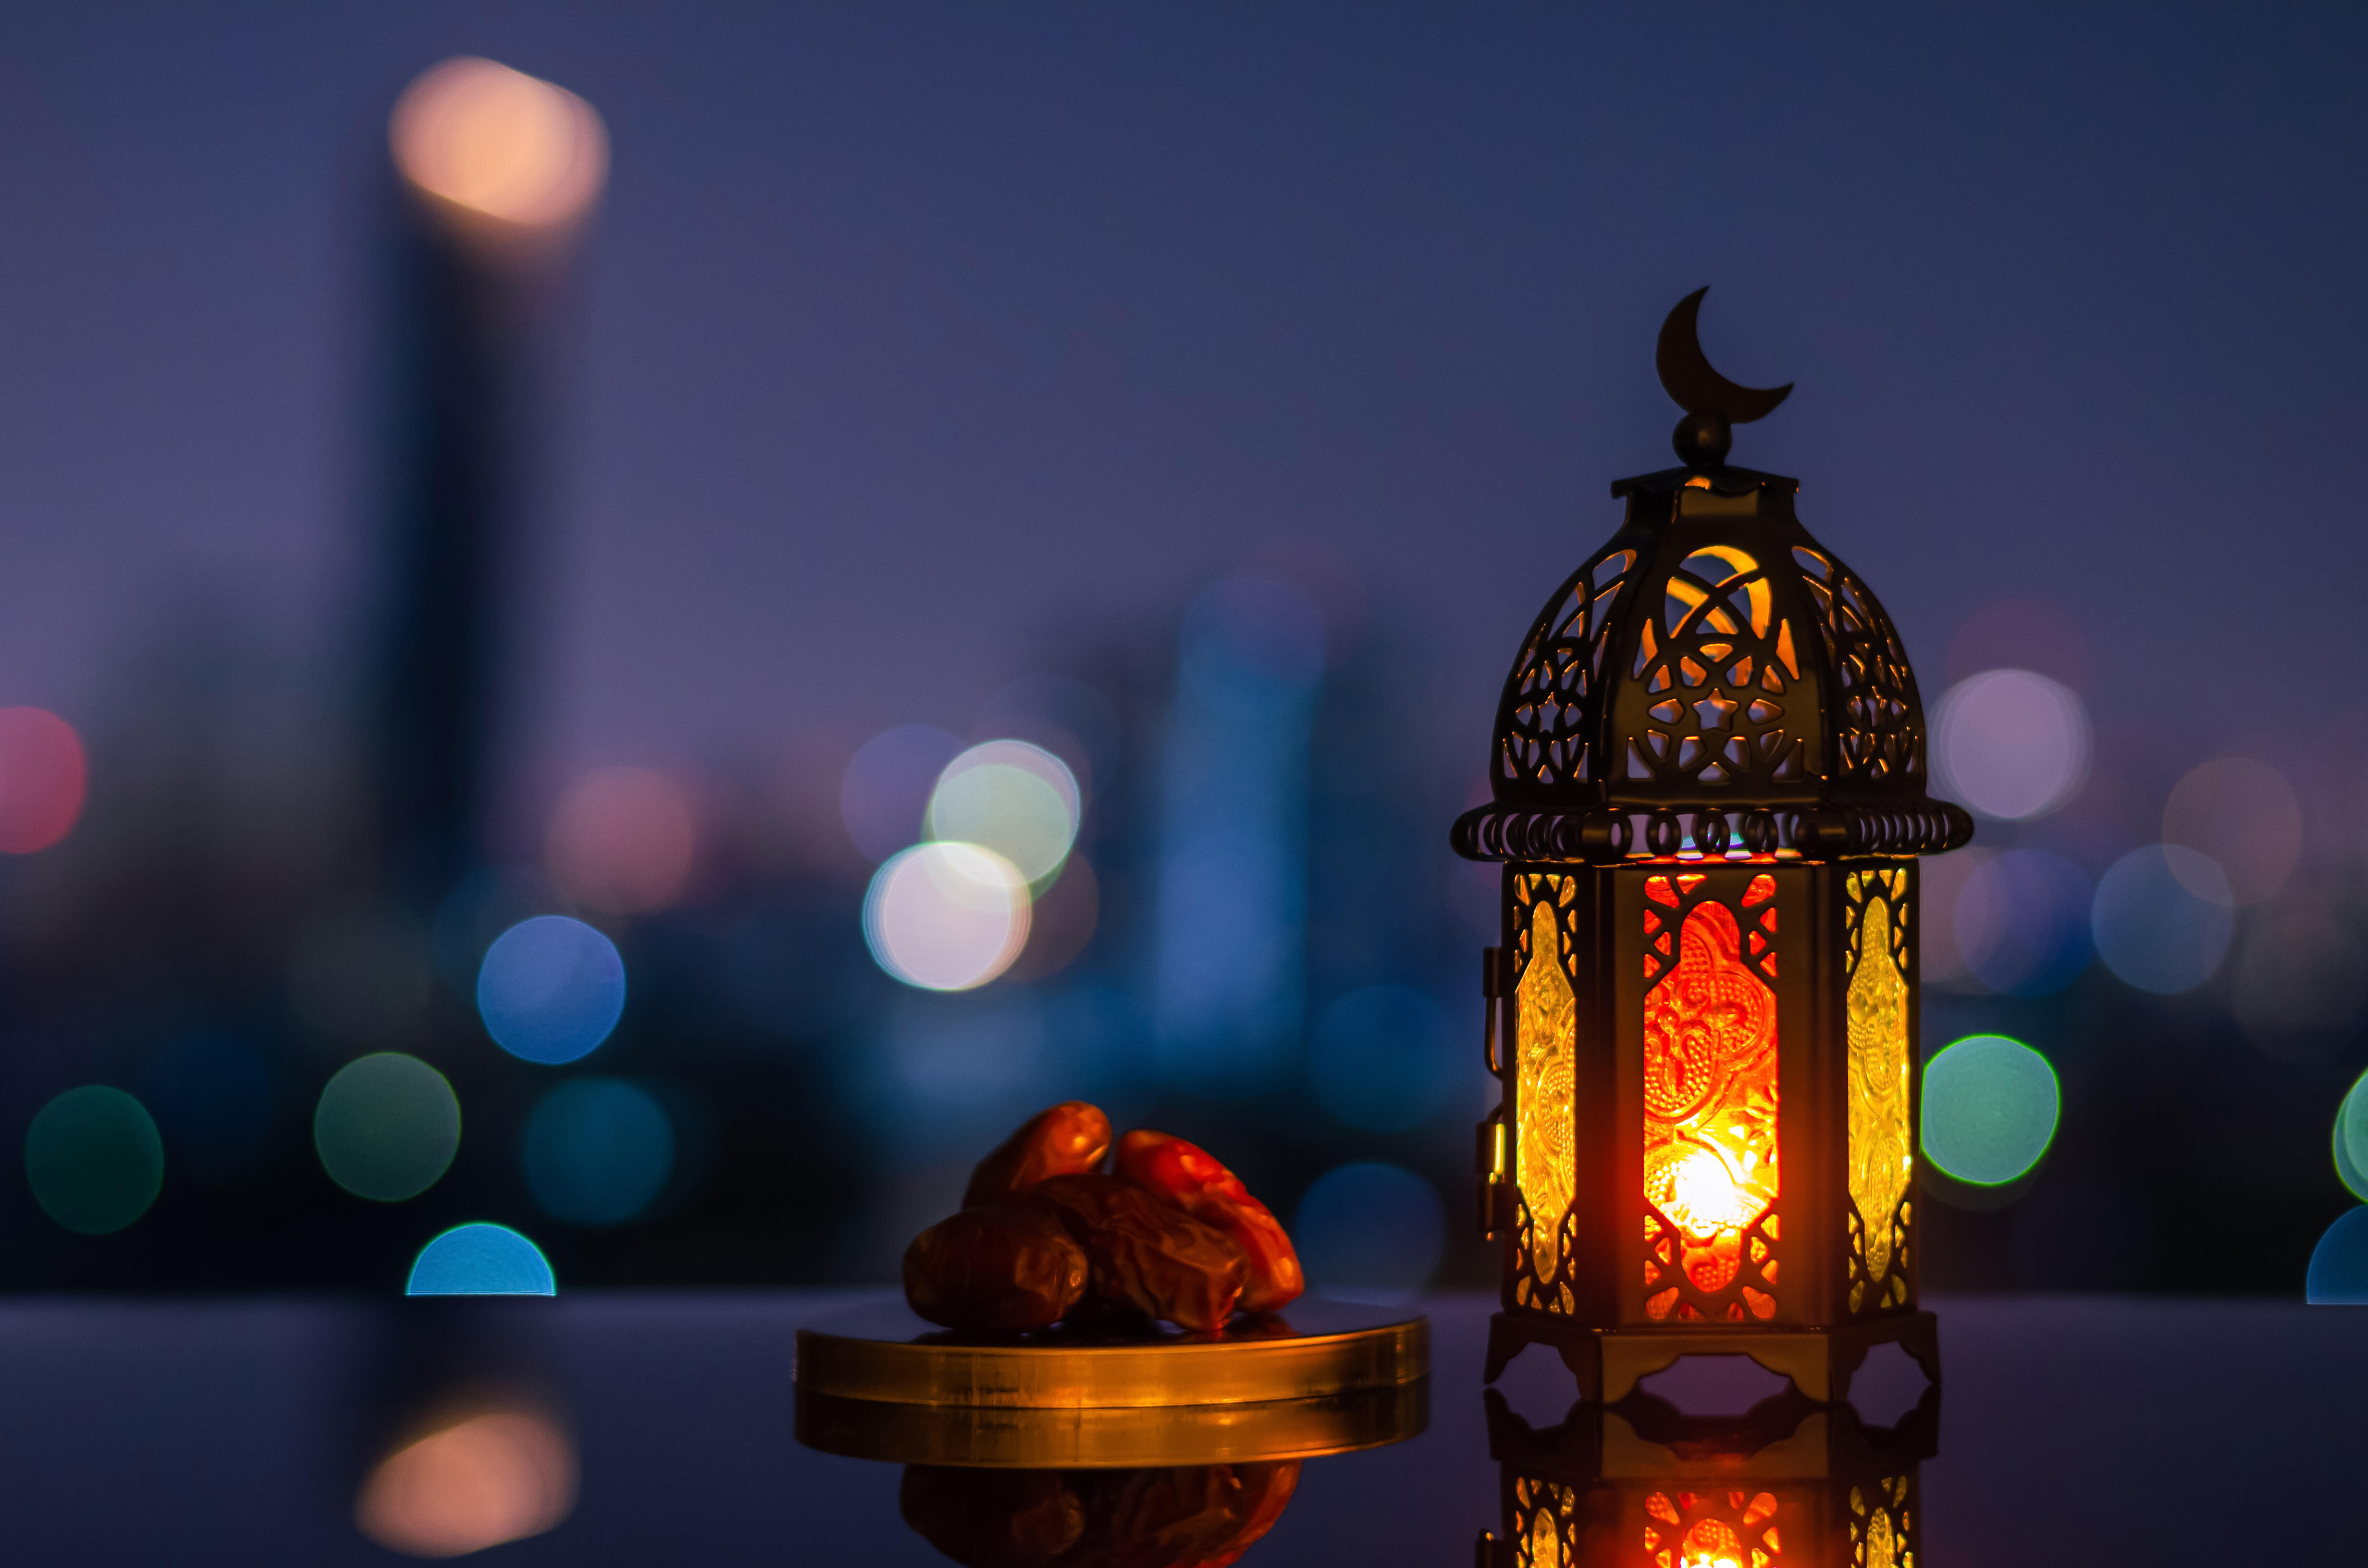 A lantern that has moon symbol on top and small plate of dates fruit with night sky and city bokeh light background for the Muslim feast of the holy month of Ramadan.